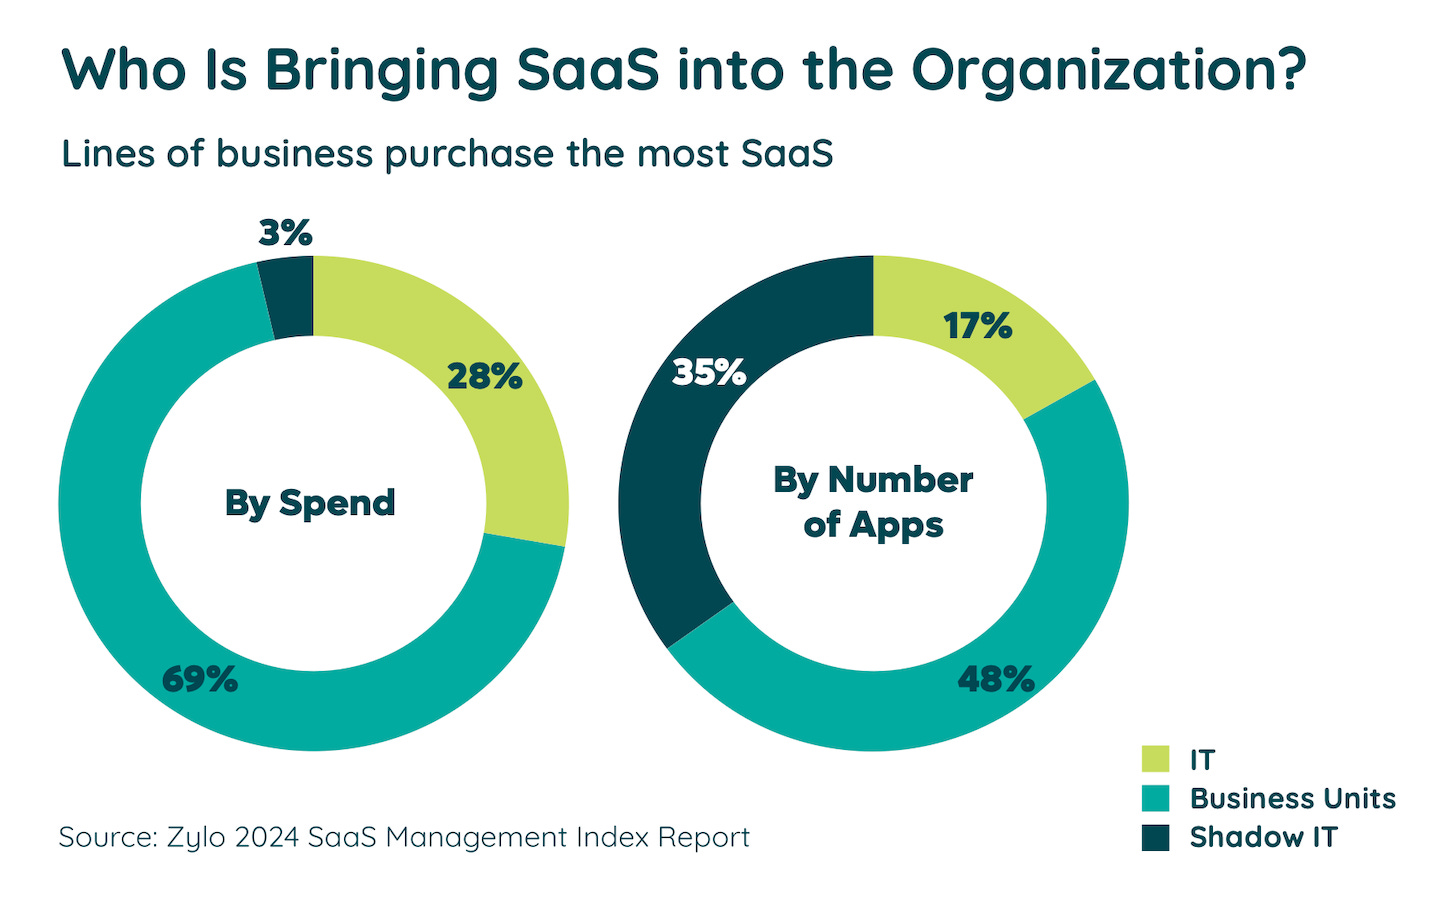 Who brings SaaS apps into the organization? IT, business, or shadow IT?